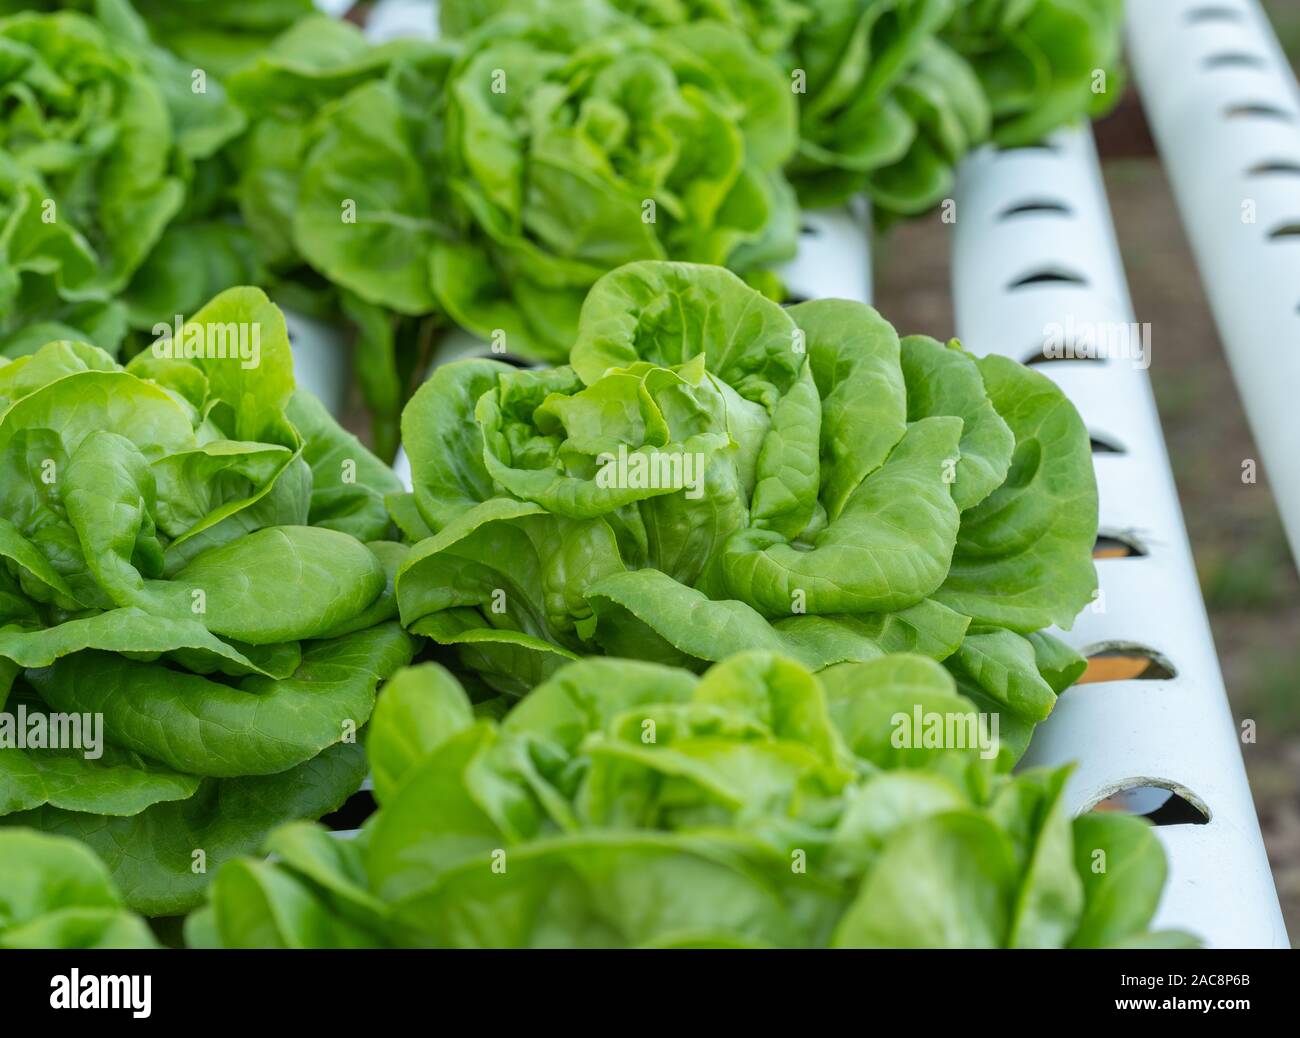 The Nutritional Delight of Growing Hydroponic Butter Lettuce at Home